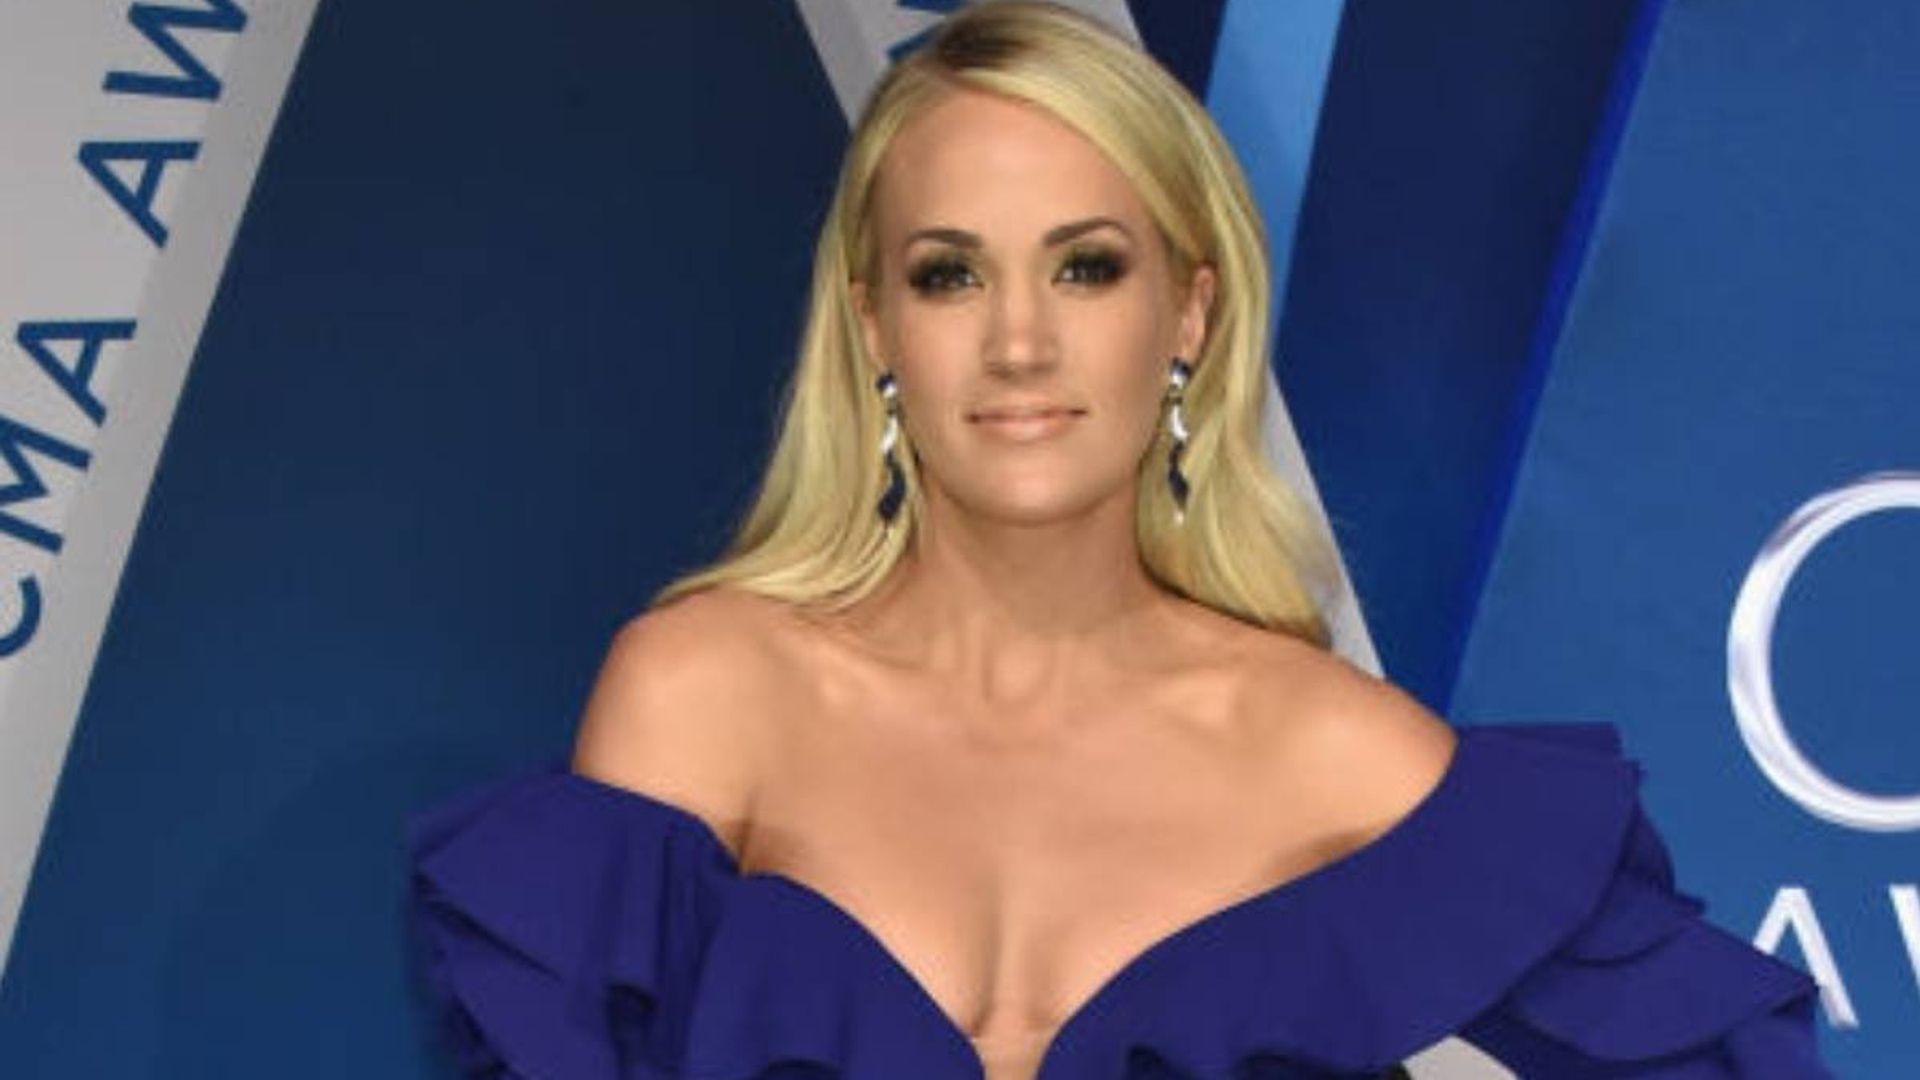 Carrie Underwood puts very toned physique on display in hot pink